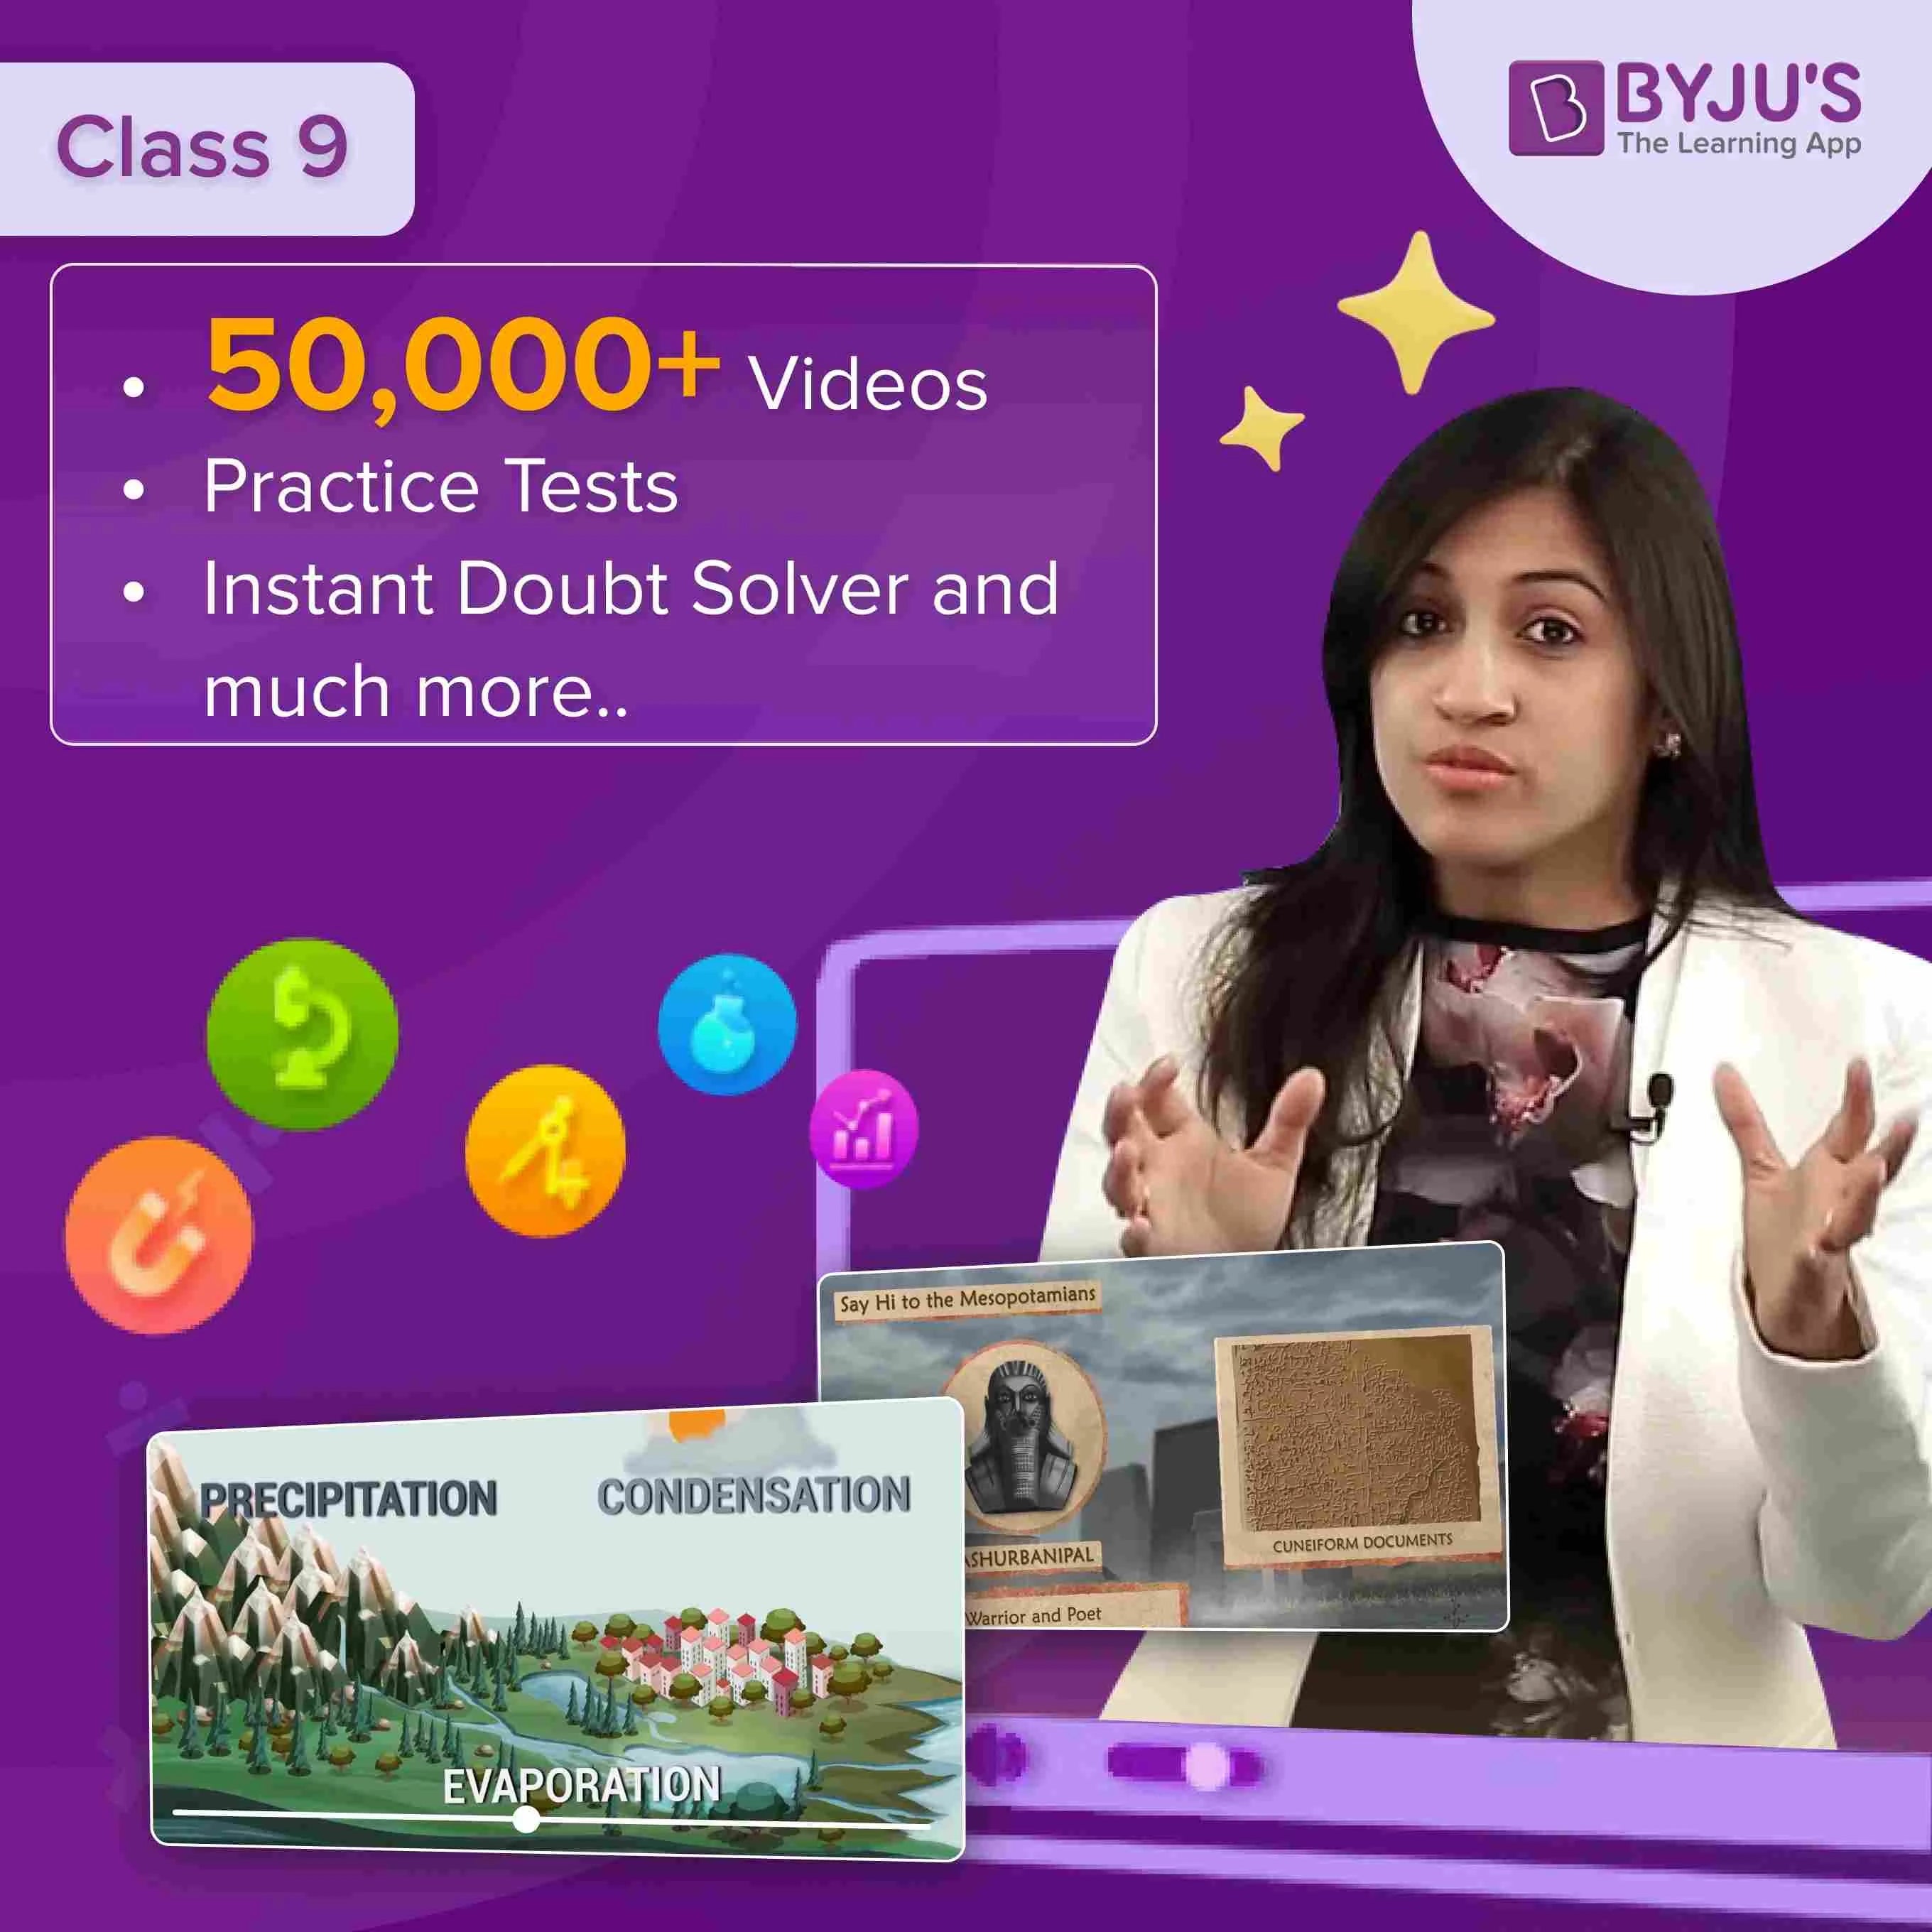 BYJU’S The Learning App - Class 9 (Renewal)